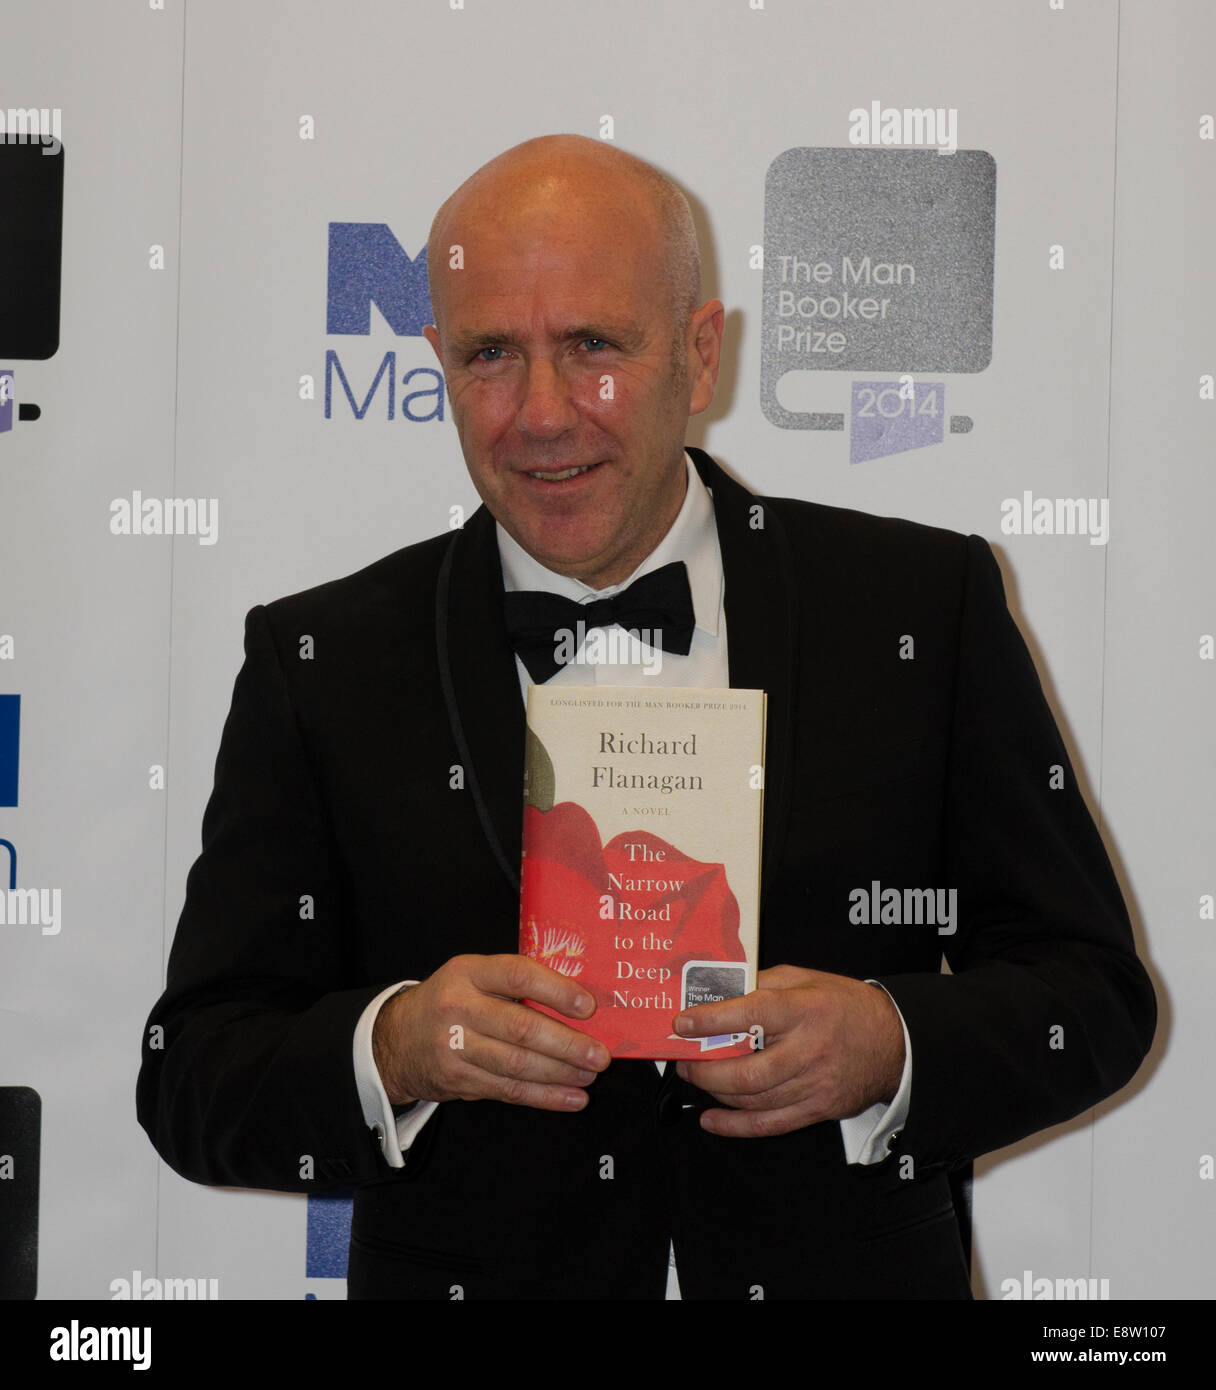 Man Booker Prize for Fiction 2014 winner Richard Flanagan for The Narrow Road to the Deep North. London, UK 14th October, 2014. Credit:  Prixnews/Alamy Live News Stock Photo